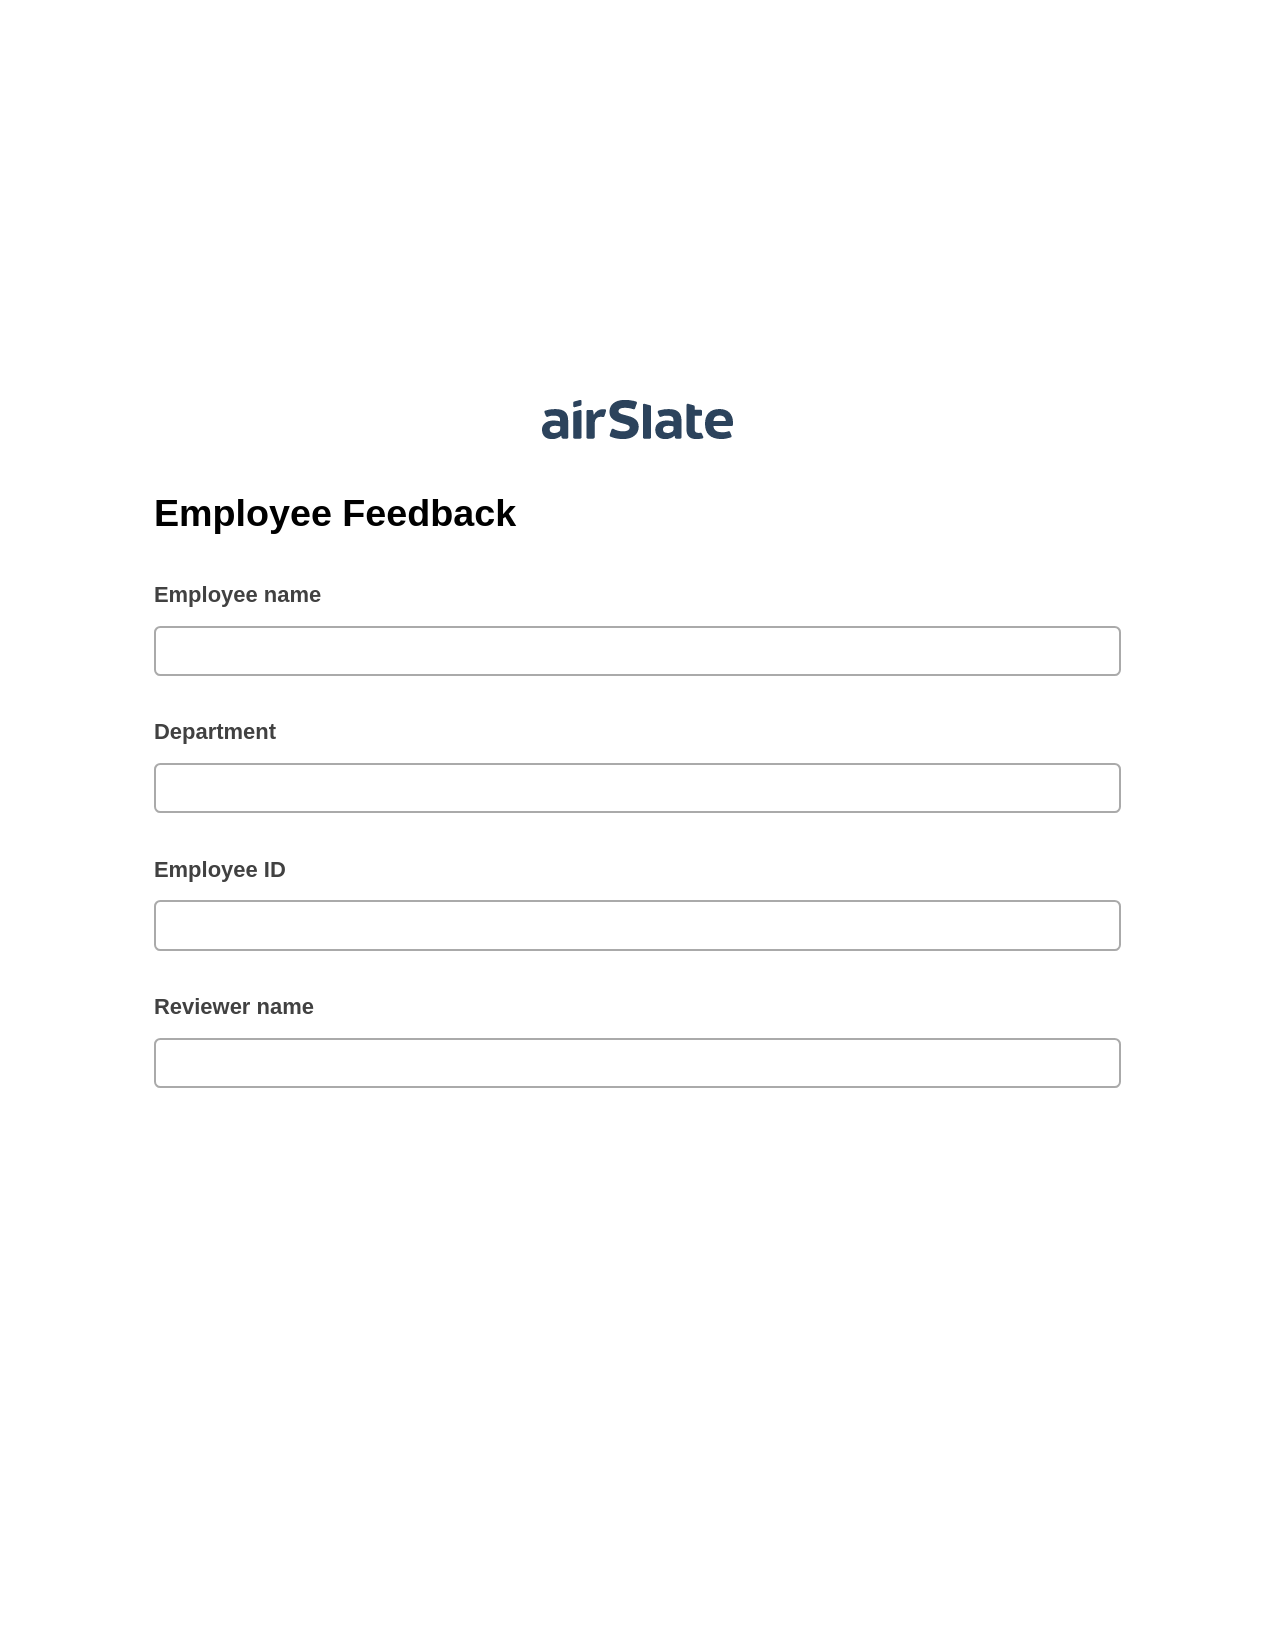 Multirole Employee Feedback Pre-fill from CSV File Dropdown Options Bot, Reminder Bot, Email Notification Postfinish Bot